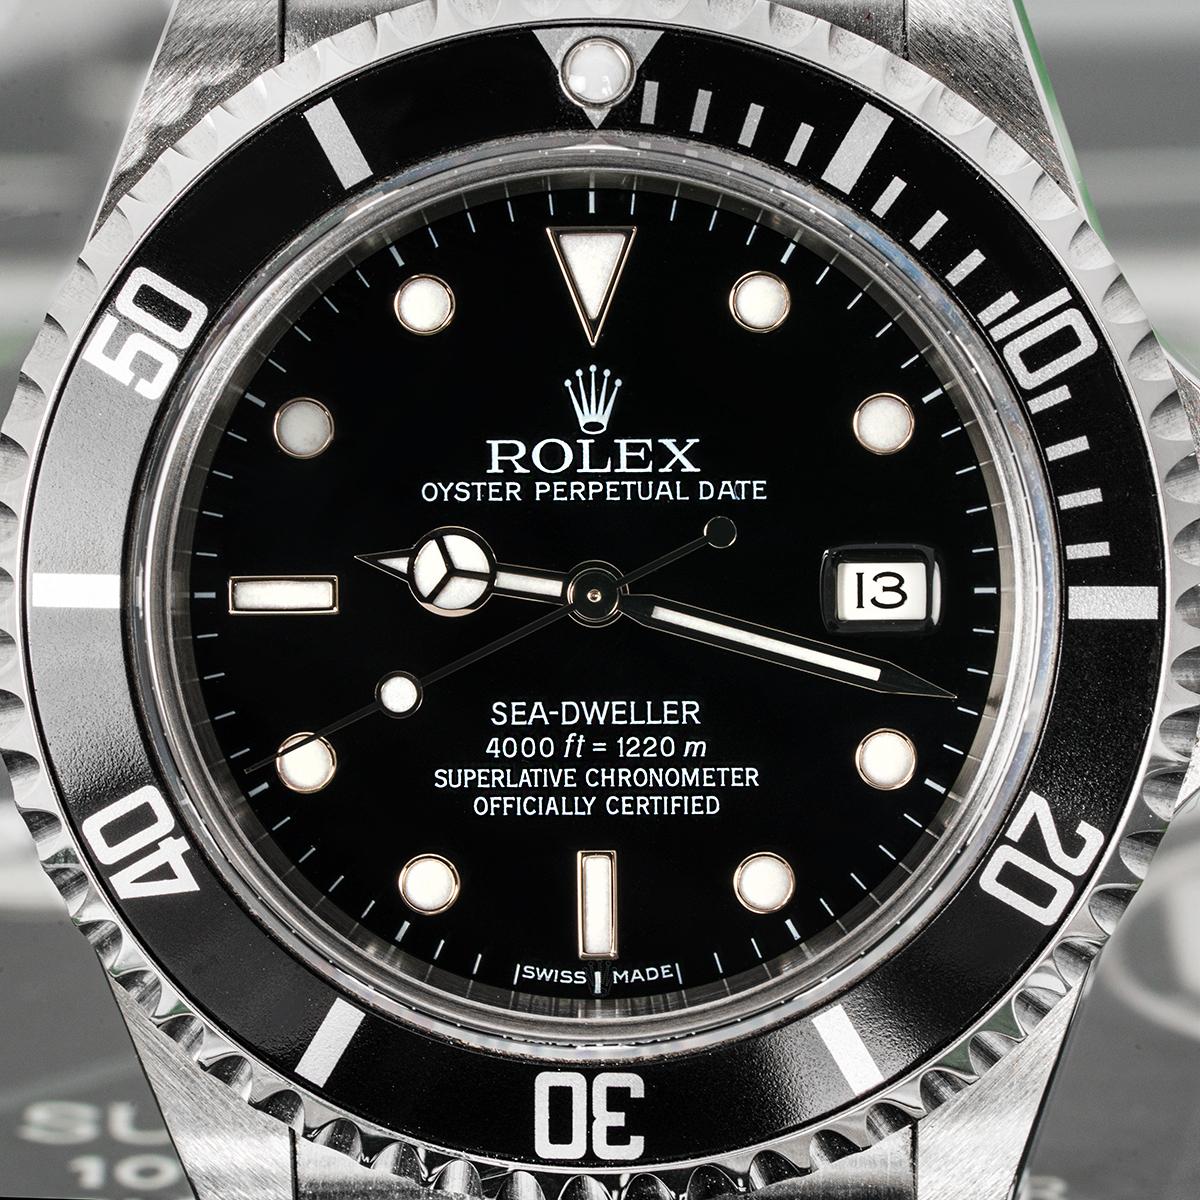 A NOS 40mm Sea-Dweller by Rolex. Featuring a black dial with applied hour markers, a date display and a black unidirectional rotatable bezel with 60 minute graduations.

The Oyster bracelet is equipped with a folding Oysterlock clasp. Fitted with a